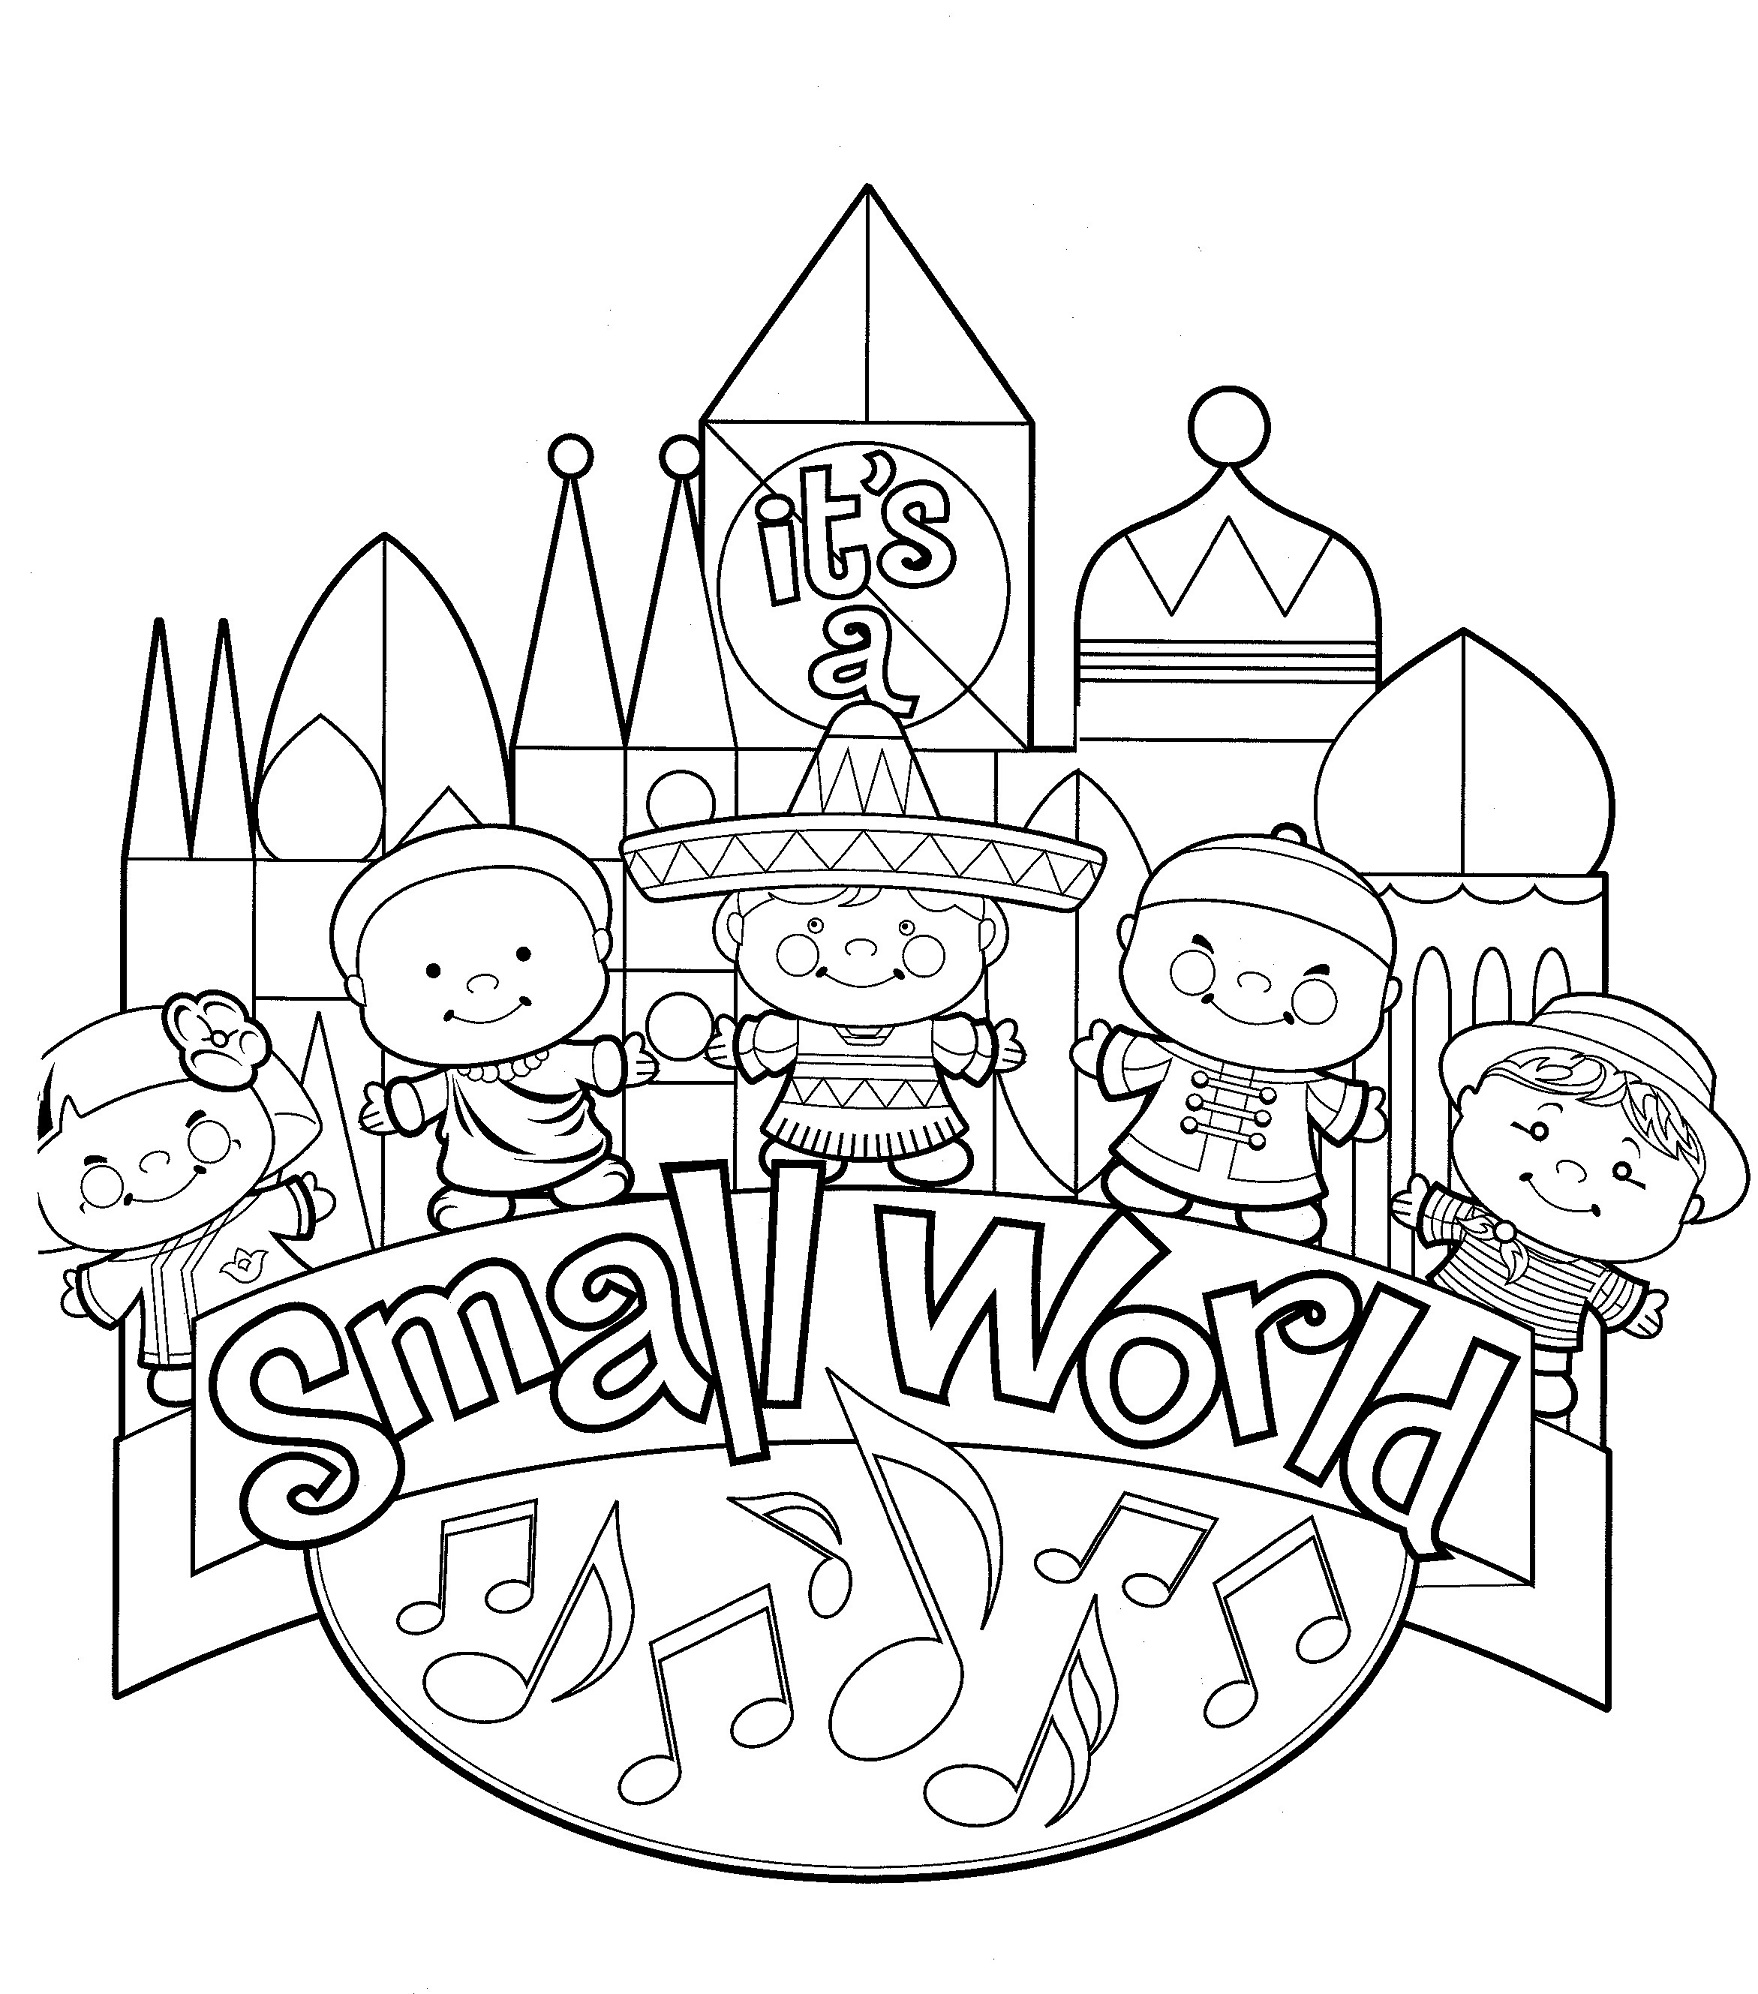 Disney Coloring Pages - It’s a Small World.